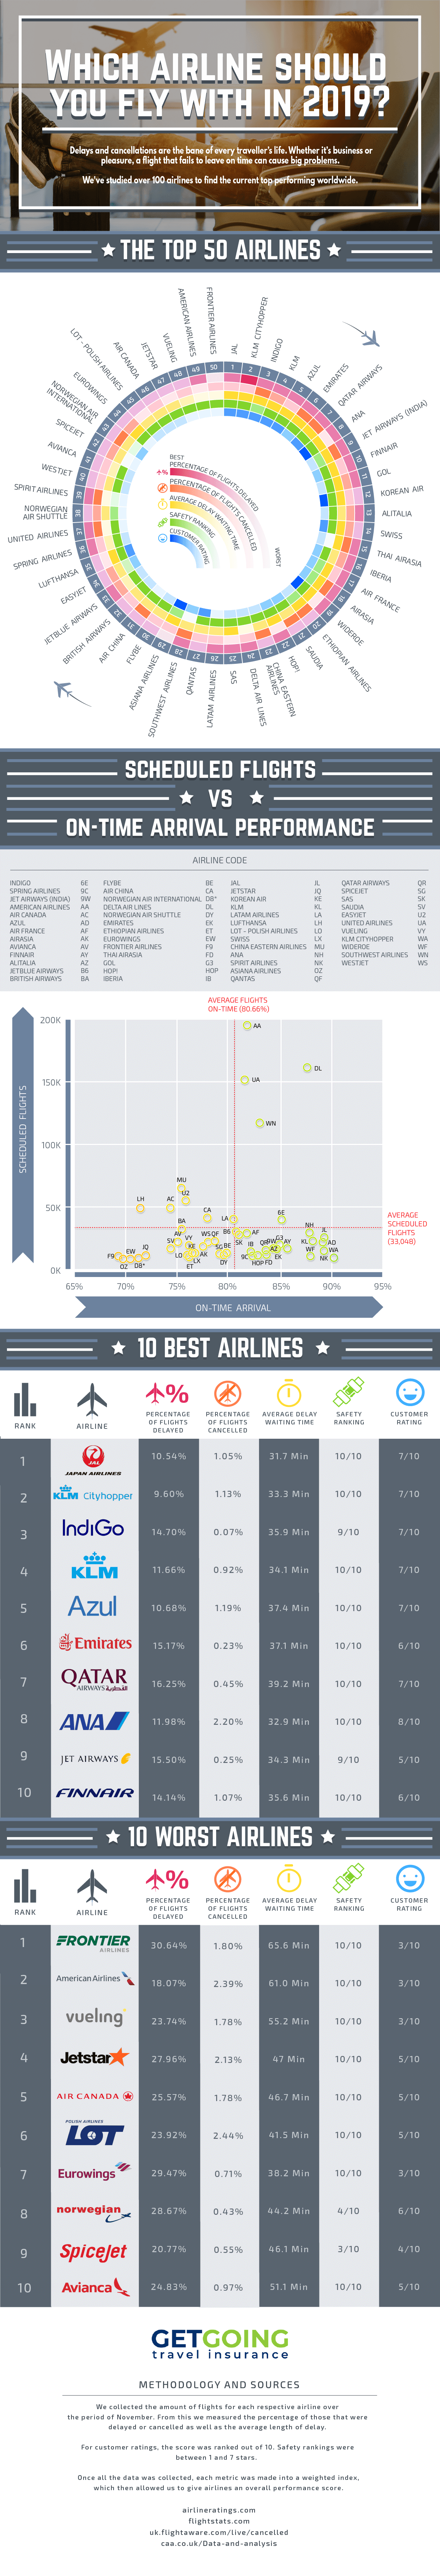 The World's Most Reliable Airlines 2019 | Get Going